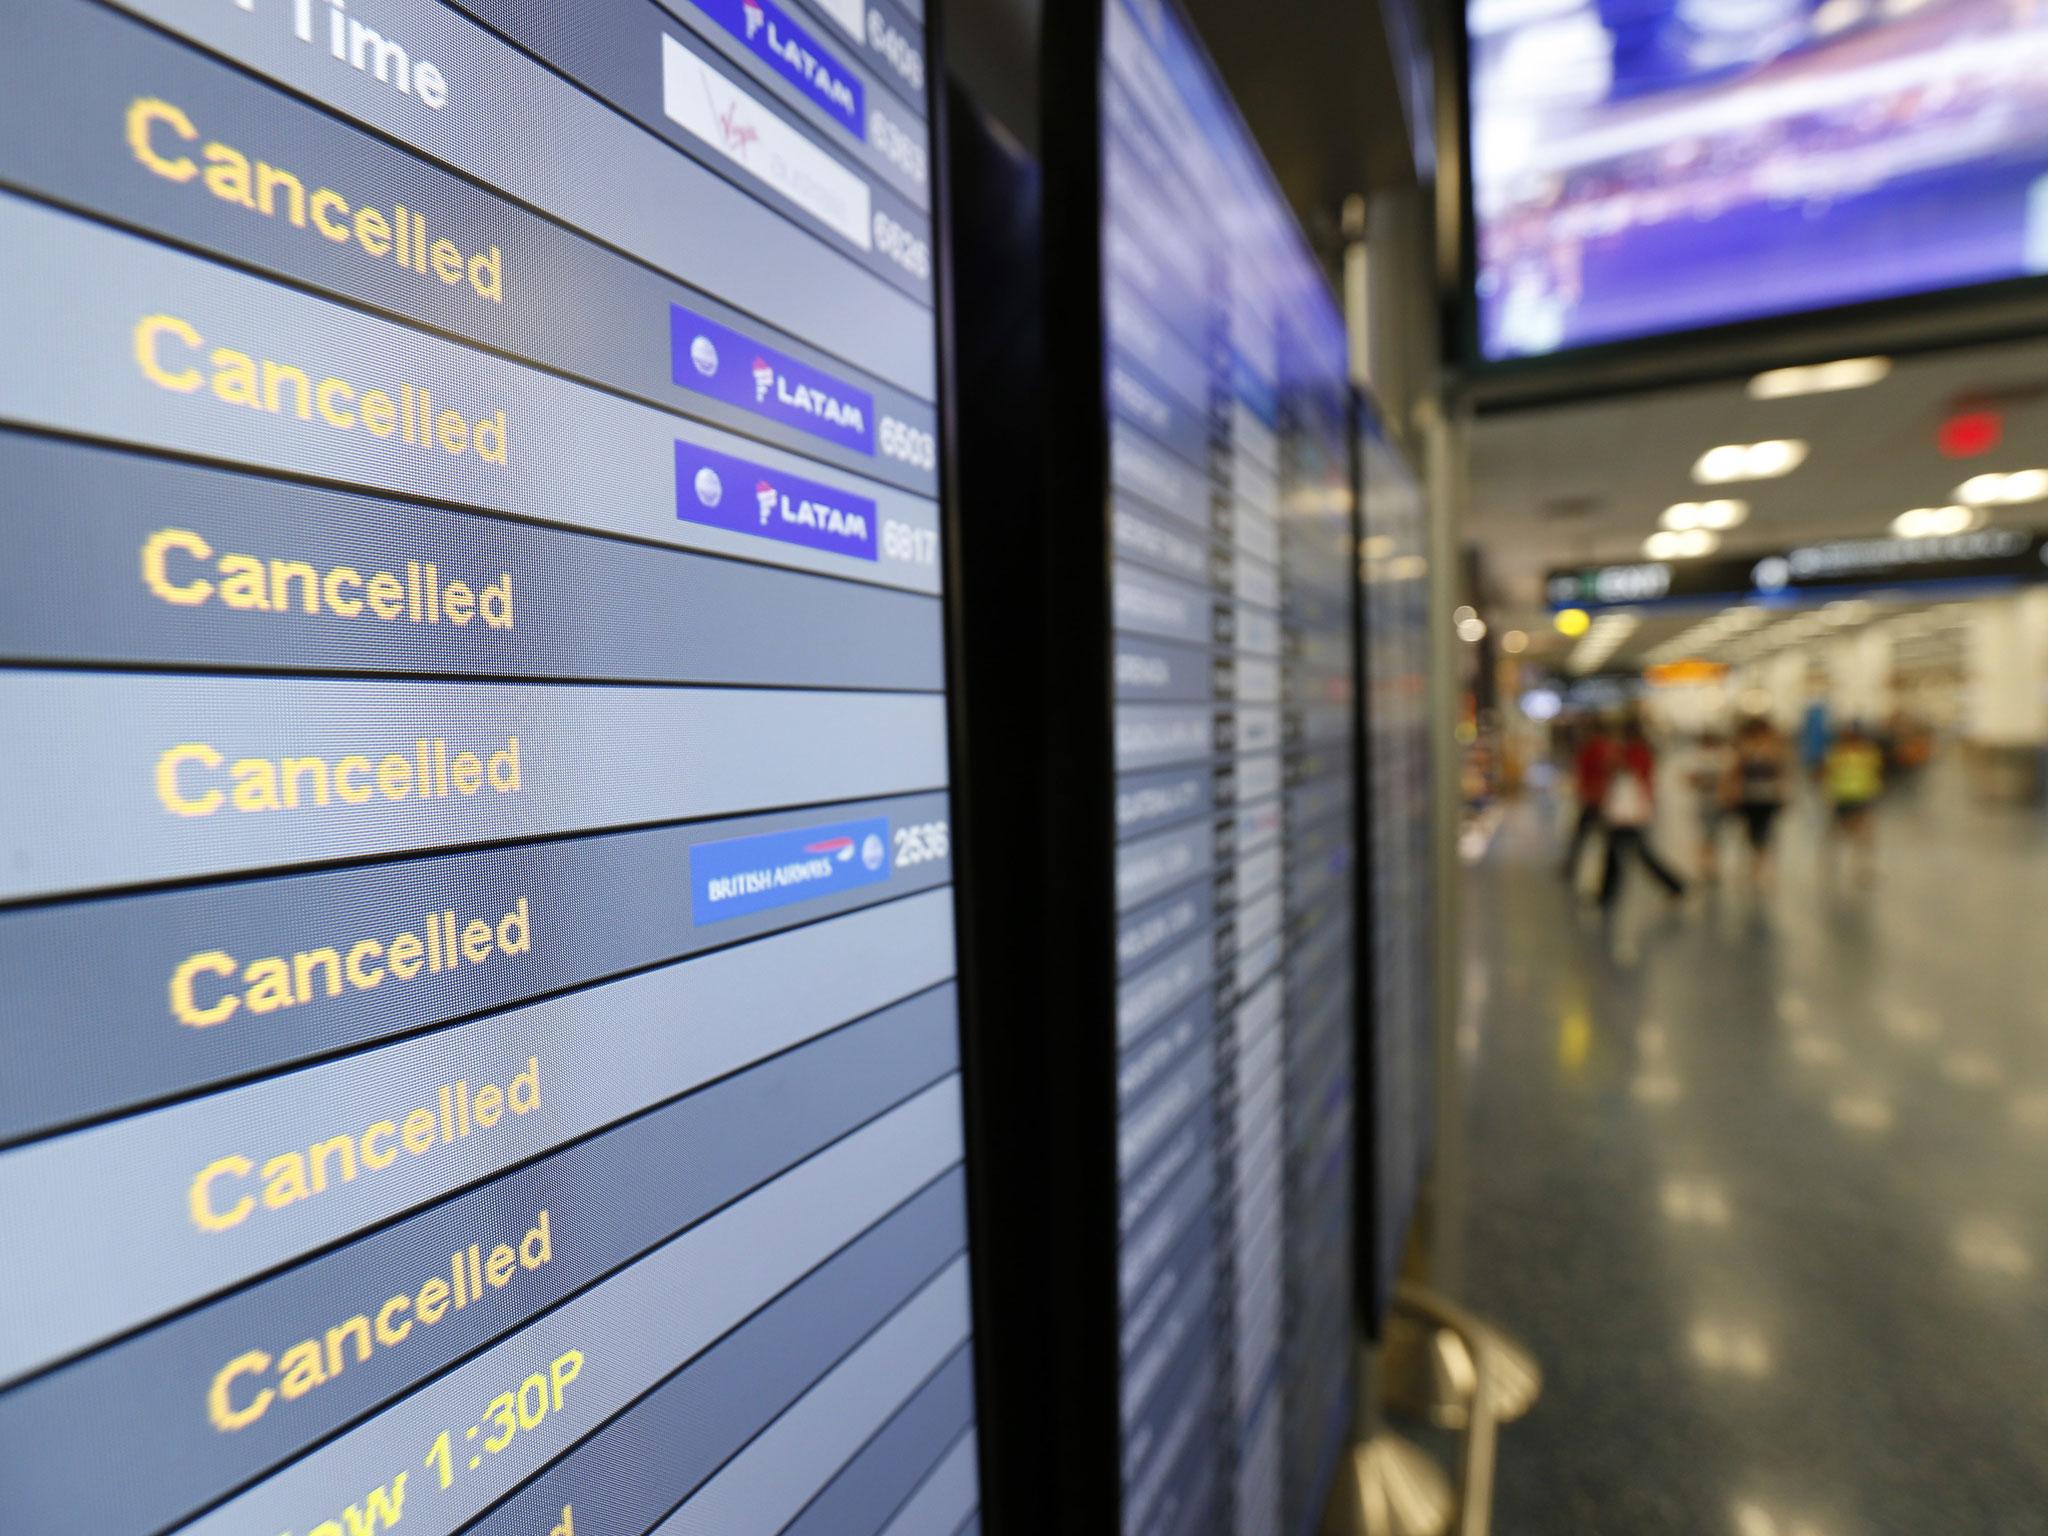 All flights from Miami International Airport have been cancelled